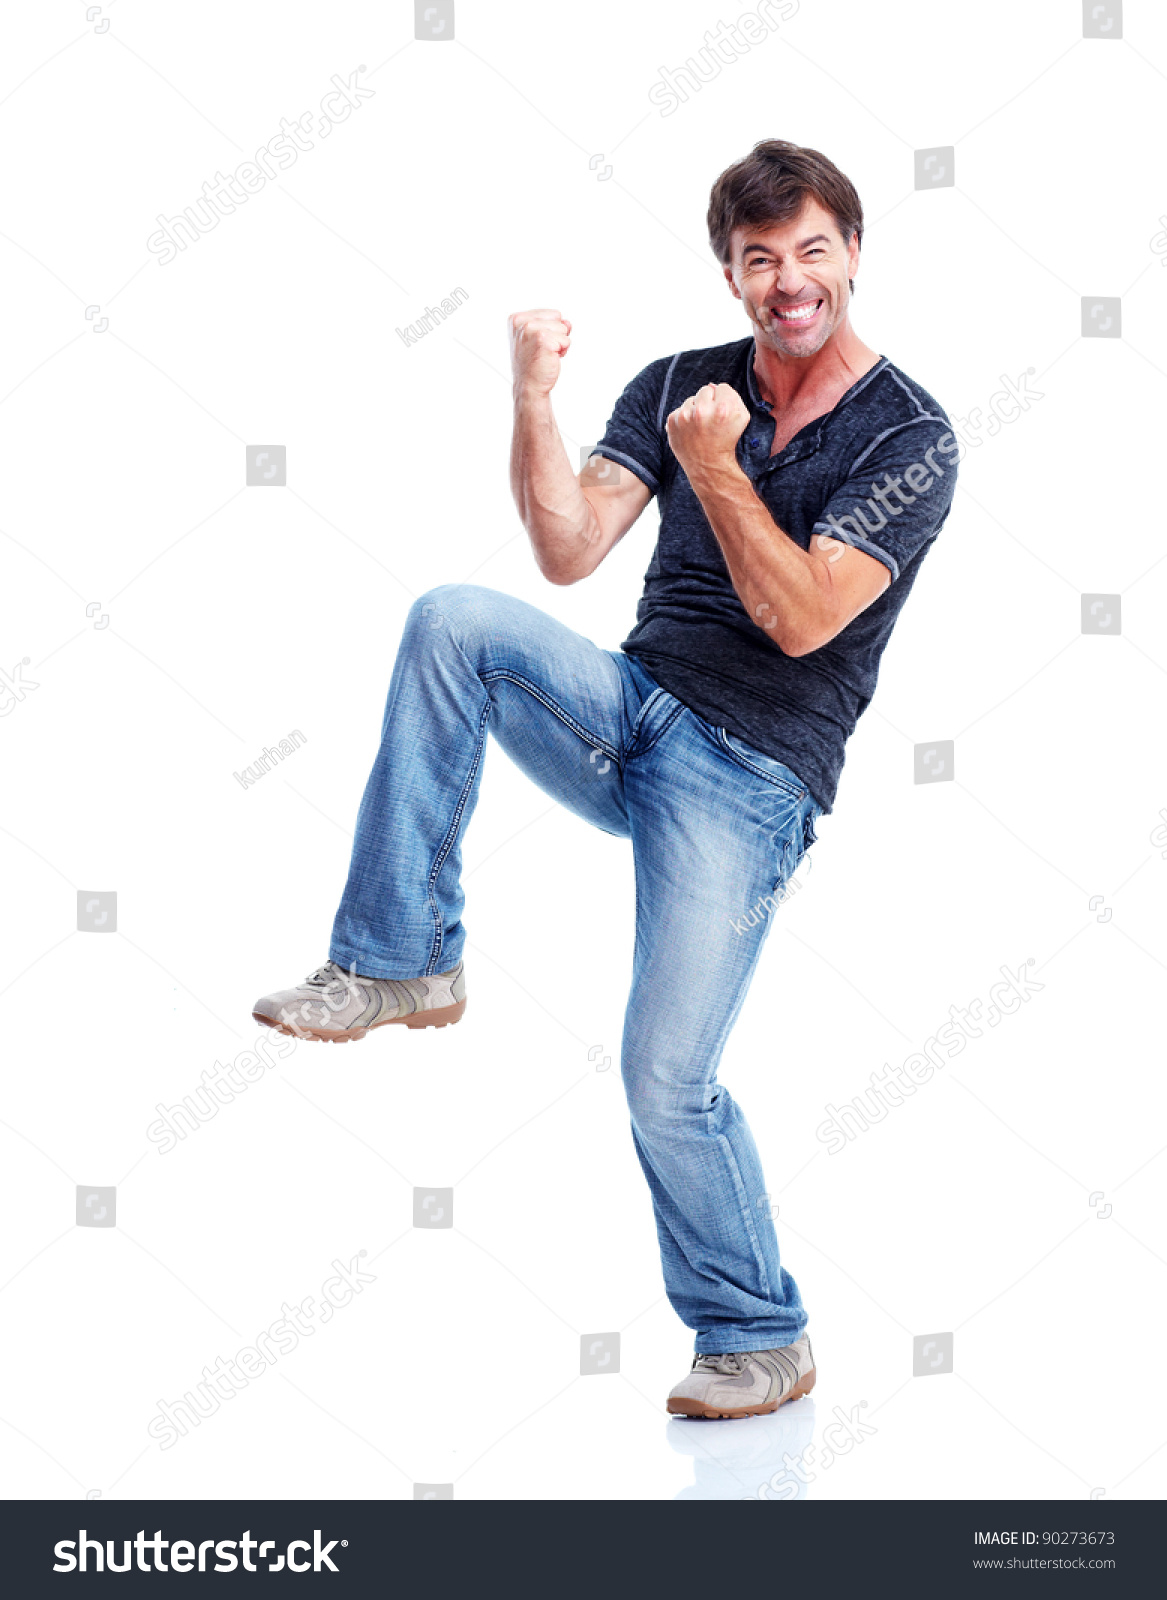 stock-photo-young-happy-man-isolated-over-white-background-90273673.jpg